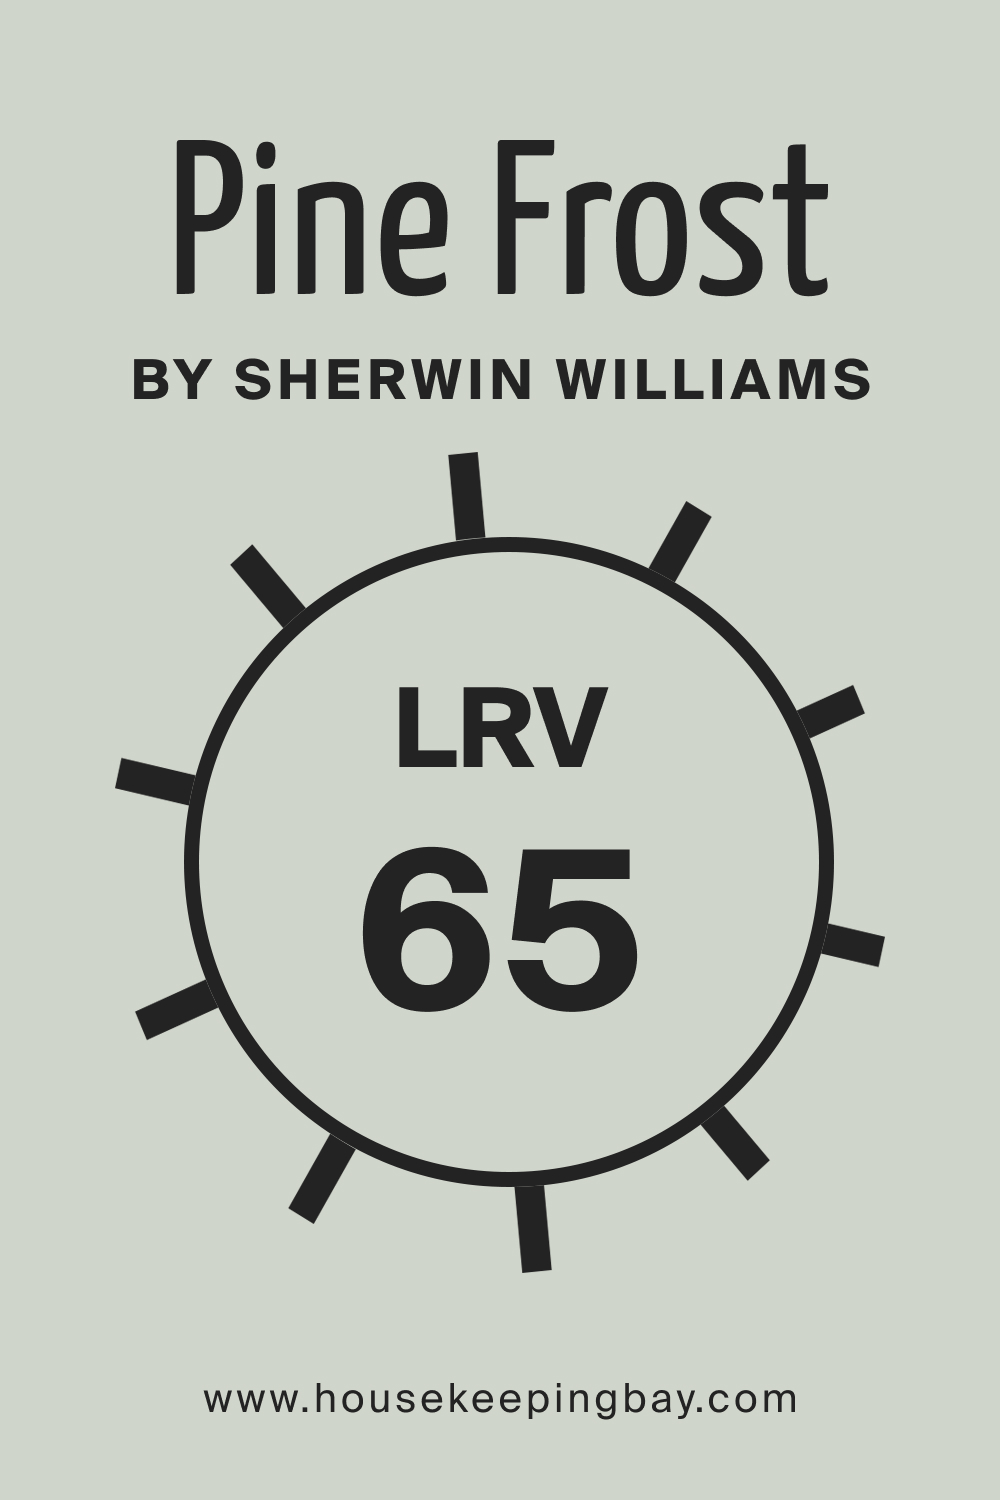 SW 9656 Pine Frost by Sherwin Williams. LRV 65